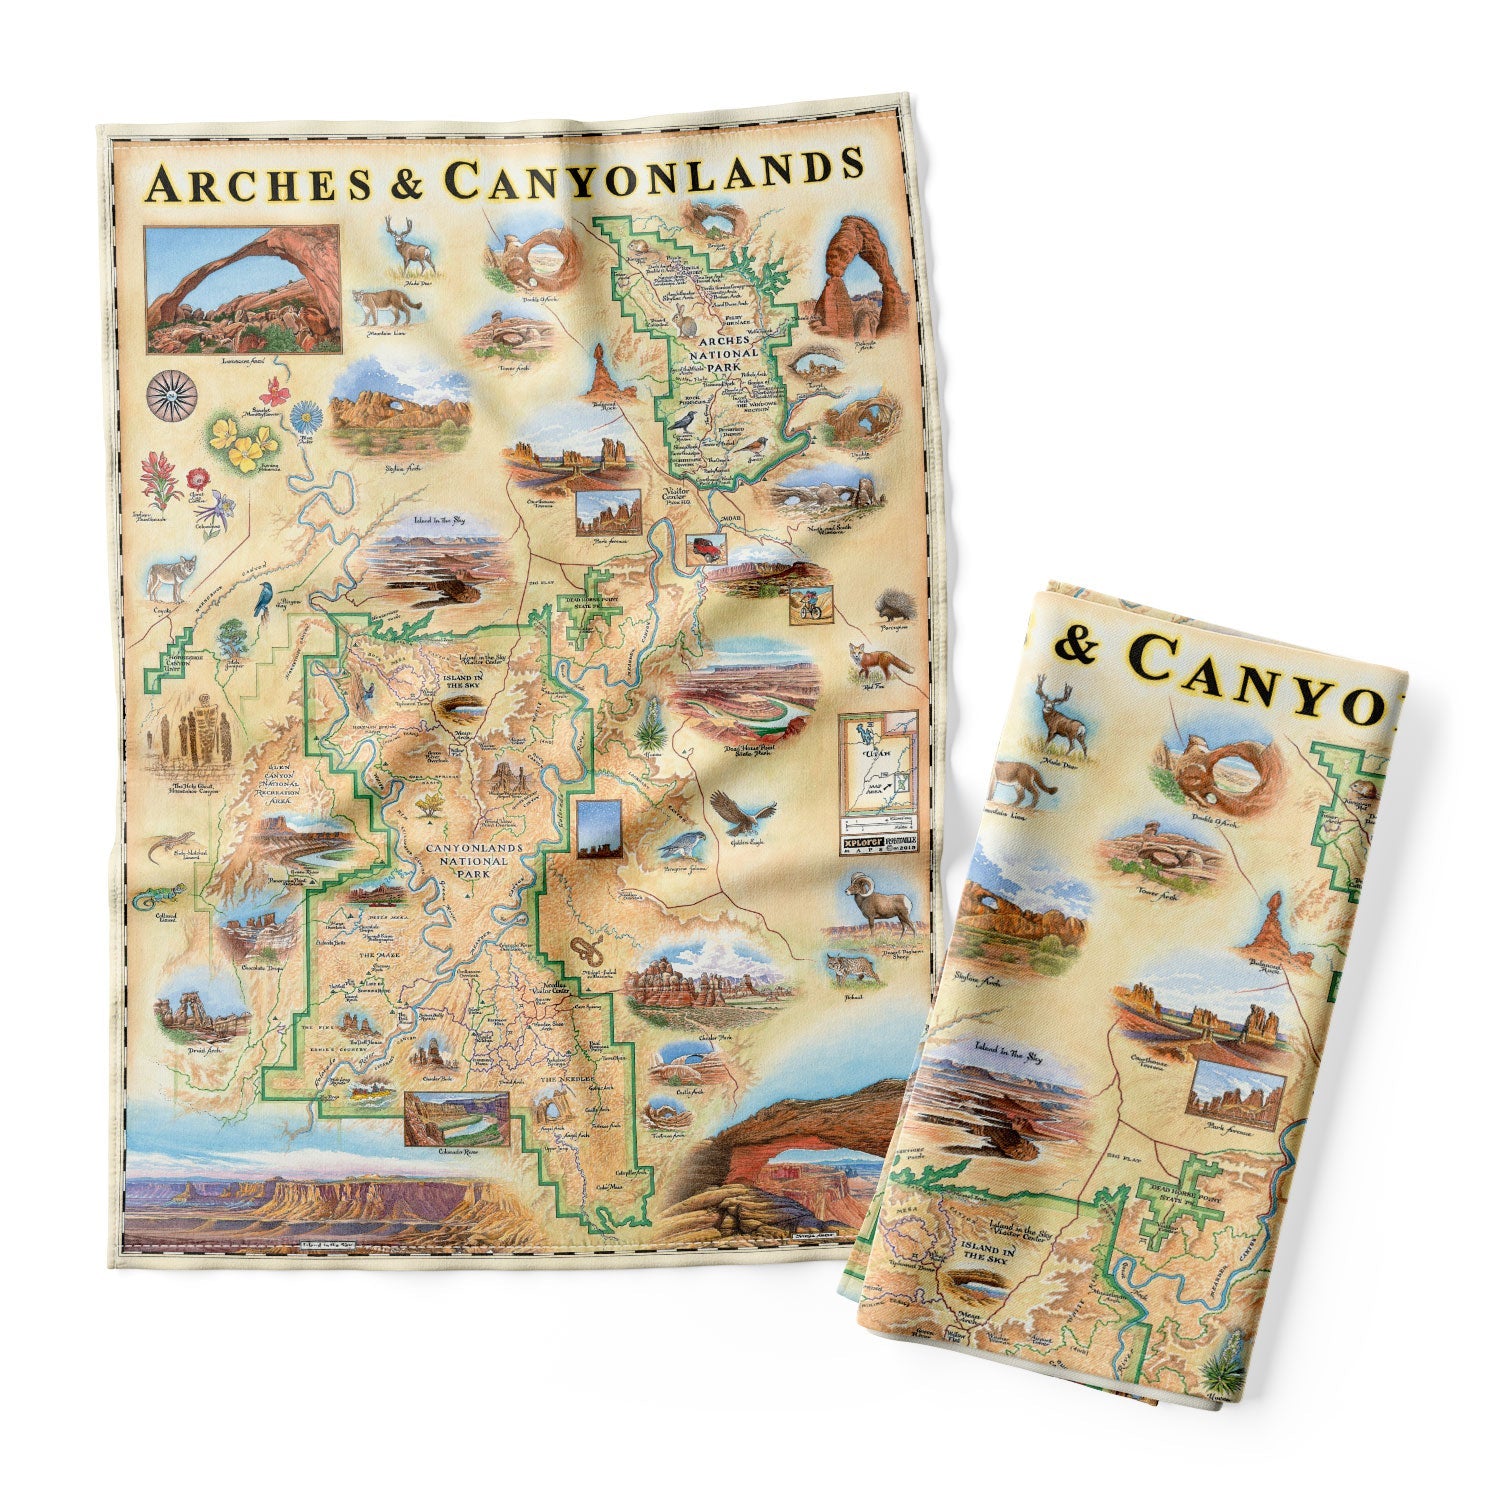 Arches & Canyonlands National Park kitchen dish towel in earth tone colors. It features foxes, eagles, flowers, and elk. The map also features illustrations of Mesa Arch, Delicate Arch, Balanced Rock, and many more.